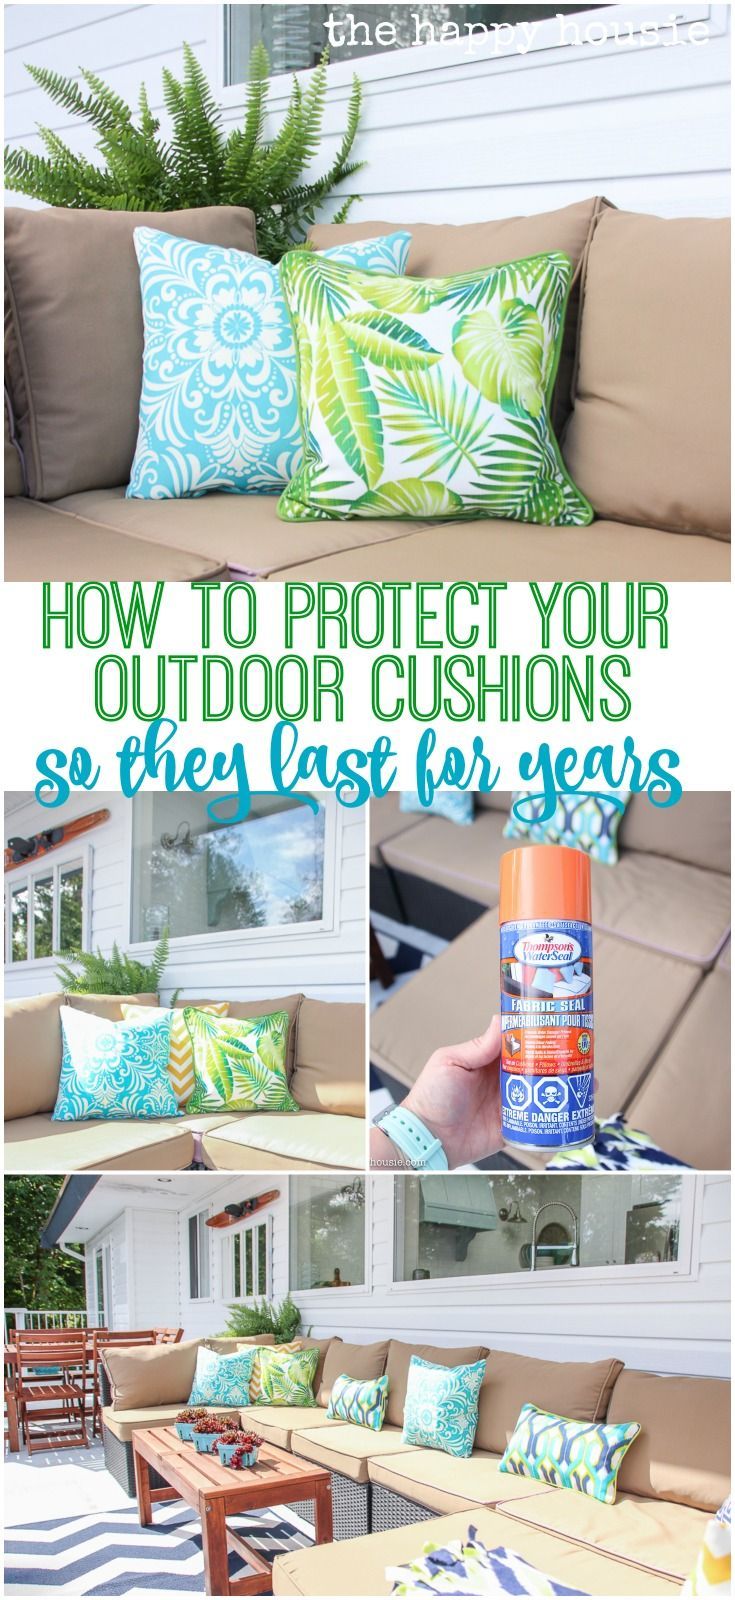 How to Protect Your Outdoor Cushions from the elements of summer so they last yo...